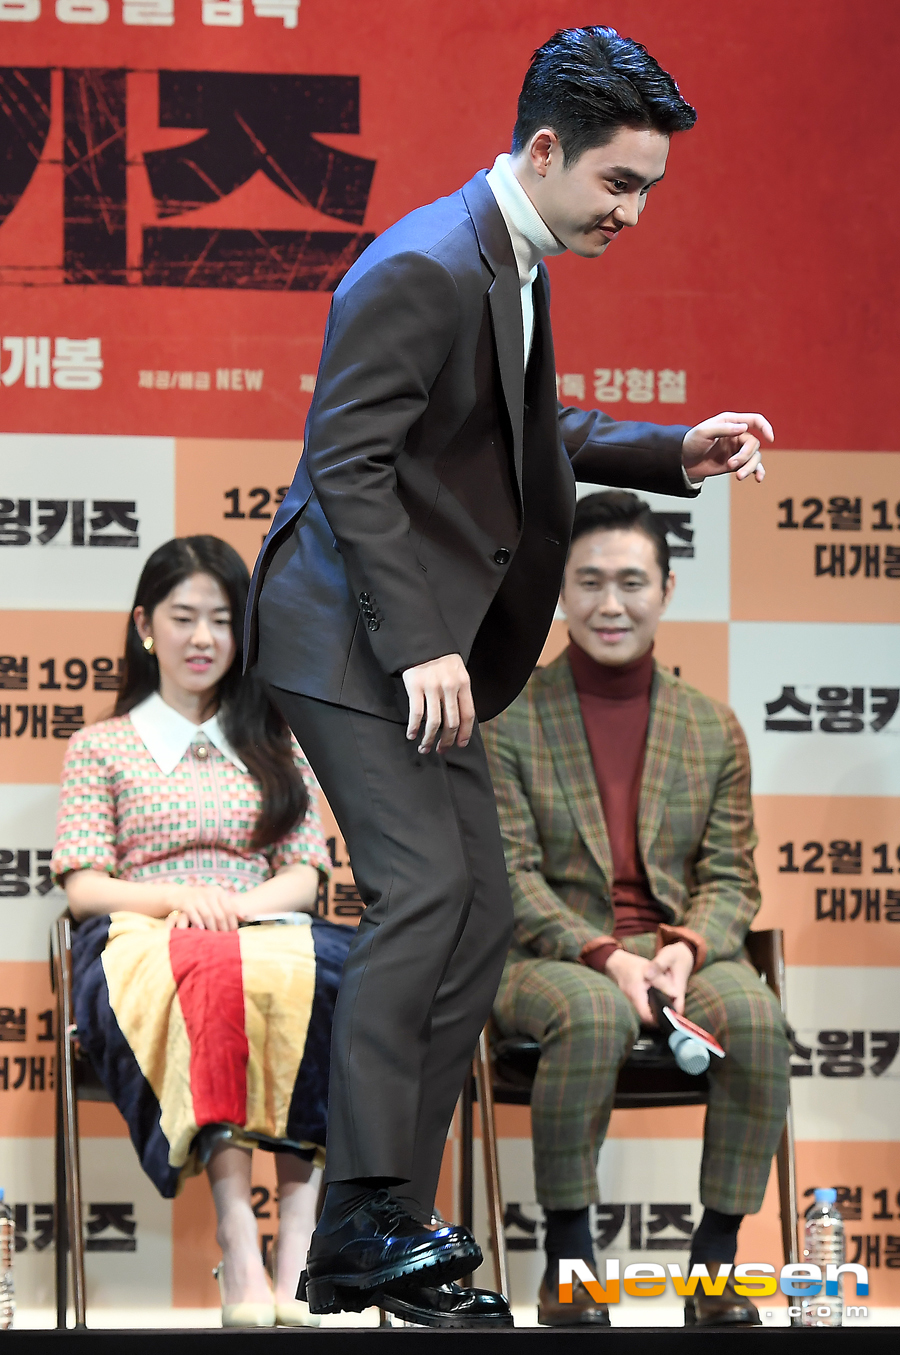 The film Swing Kids (director Kang Hyung-chul) production report was held at the SMTOWN Theater on the 5th floor of COEX Atium in Gangnam-gu, Seoul on November 12 at 11 am.D.O. attended the meeting.Swing Kids is a film about the heartbreaking story of Swing Kids, a dance dance group that was united in 1951 by the Geoje Island prison camp, Passion for Dance.(Exo Dio), Park Hye-soo, Oh Jung-se and others.Jung Yu-jin